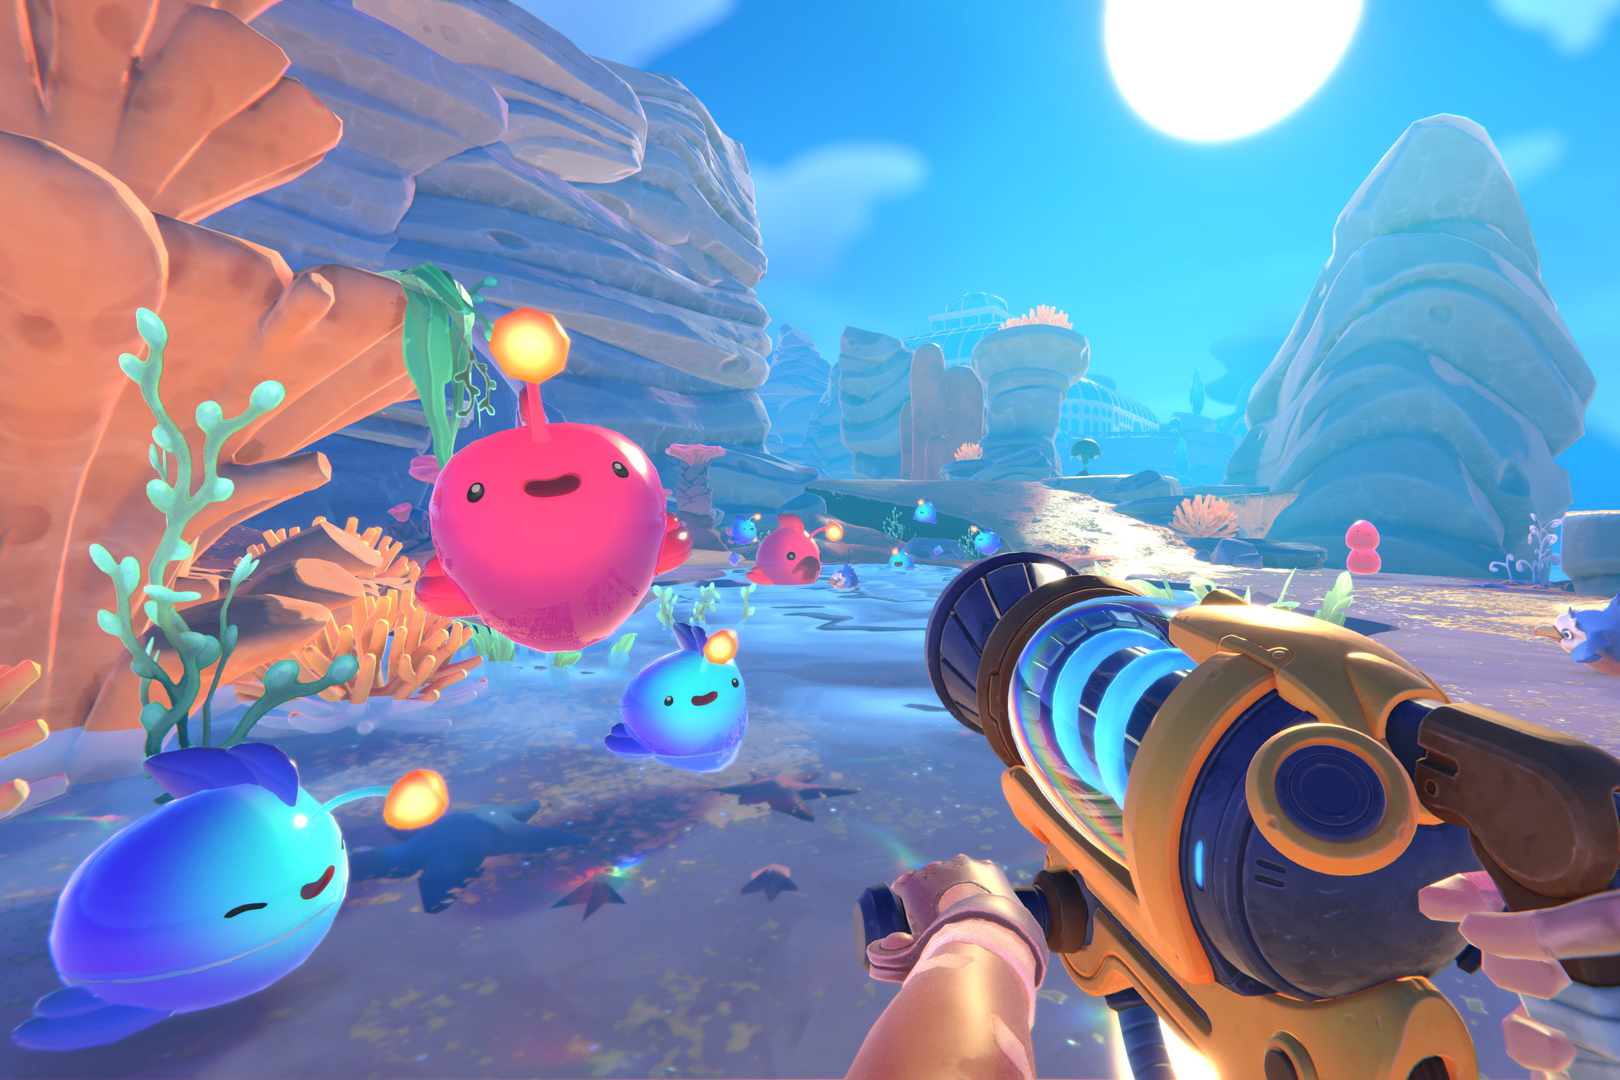 Hold my plorts, there's a Slime Rancher movie on the cards